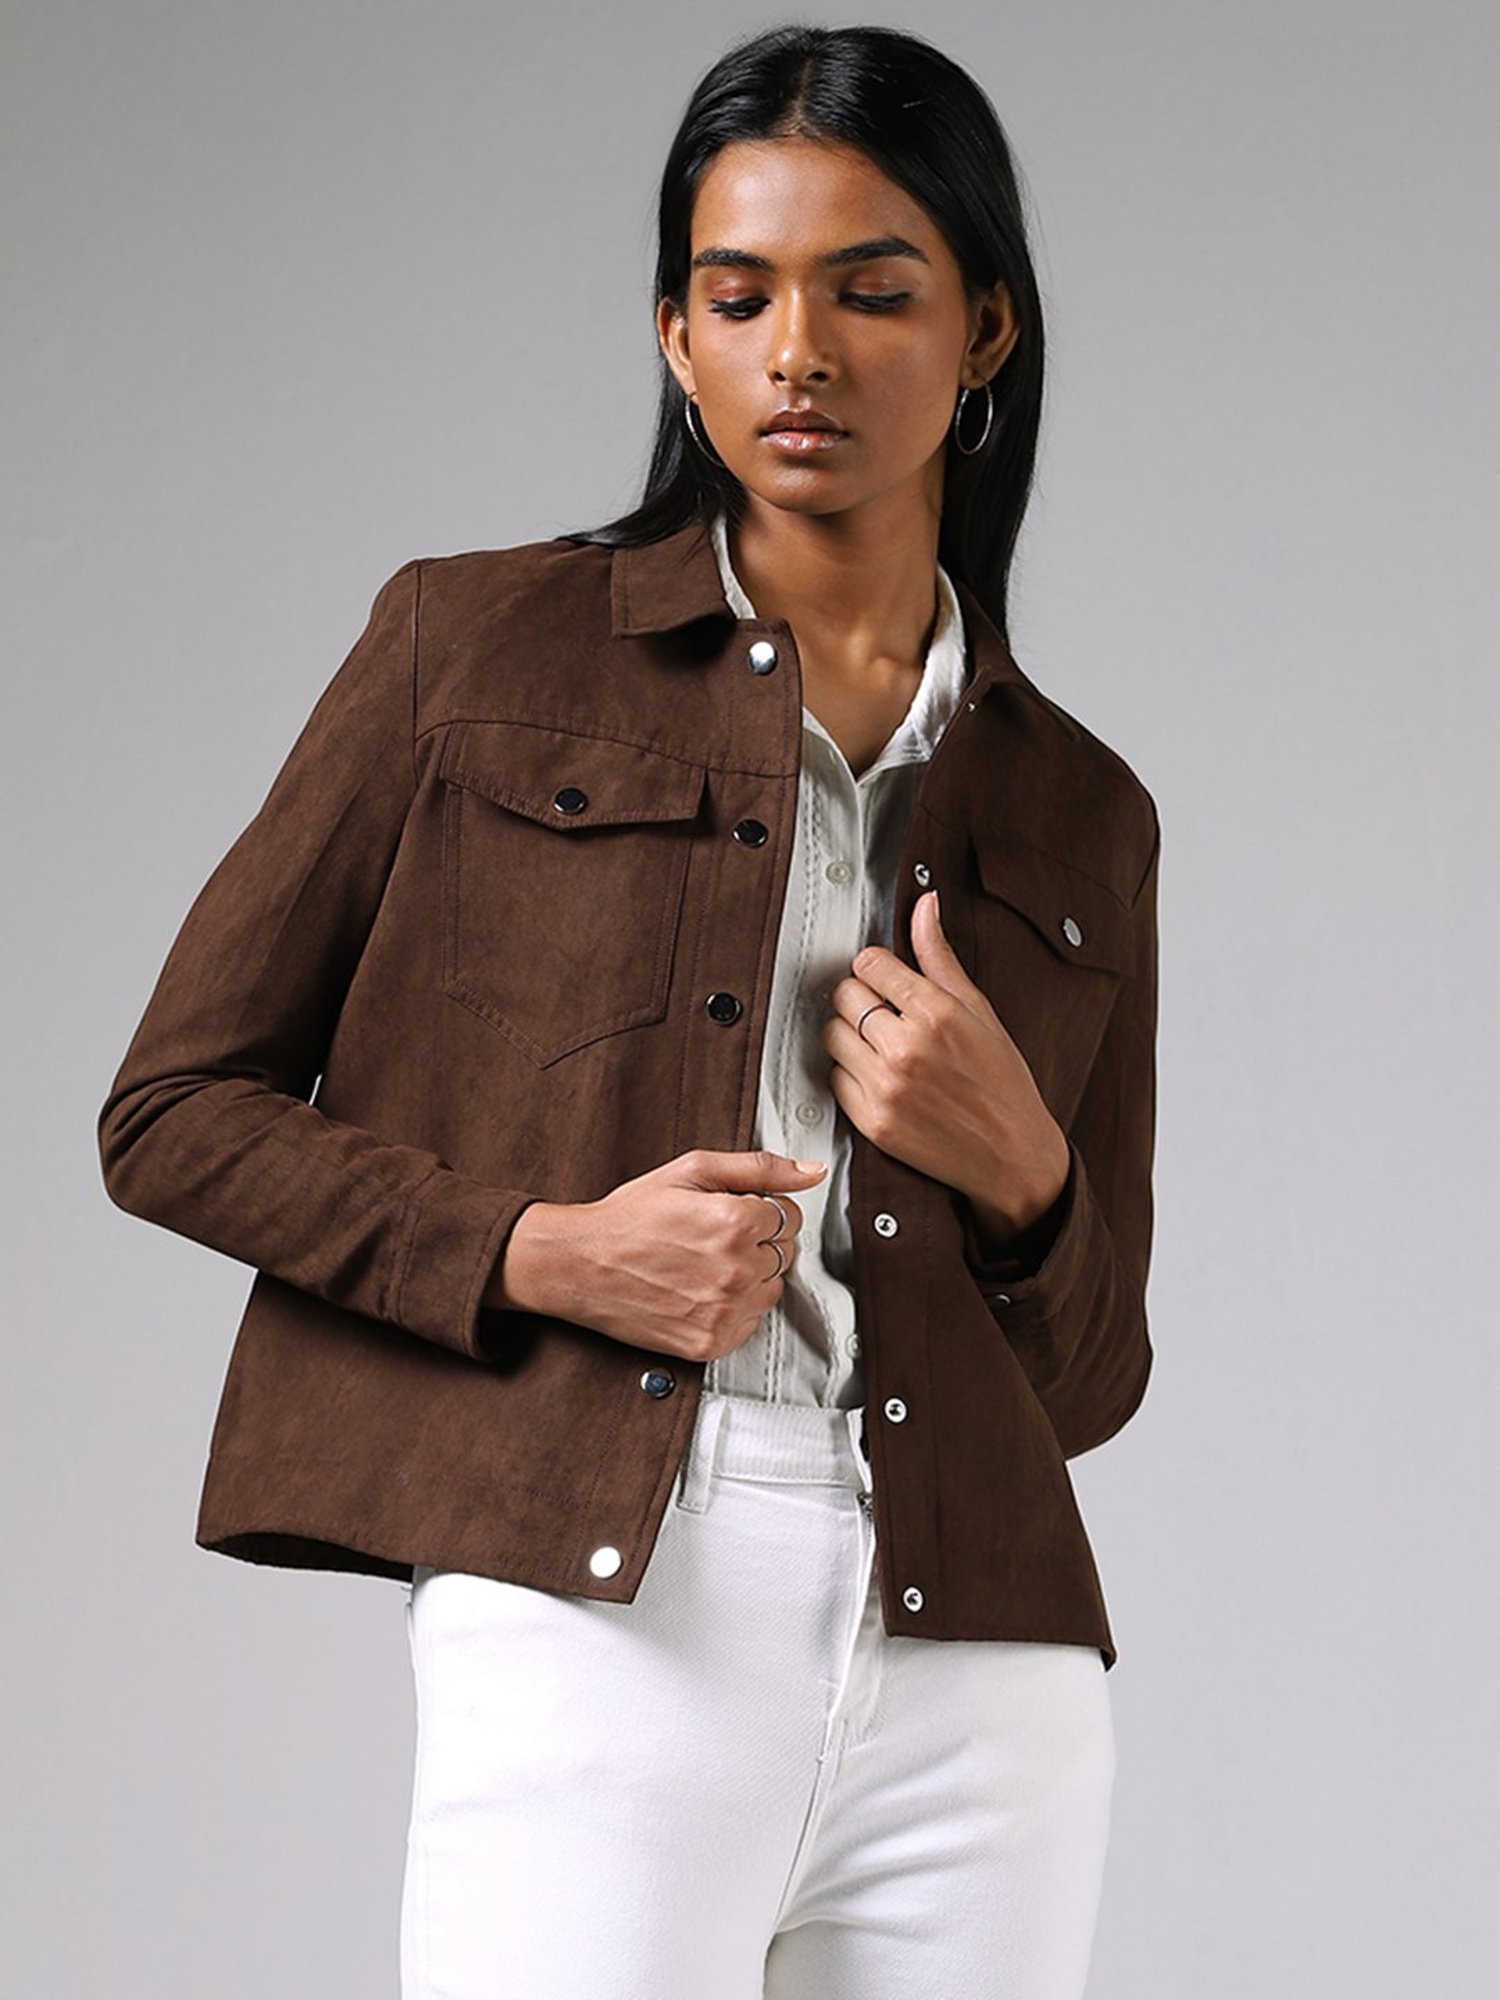 Brown Suede Jacket Outfits For Women (28 ideas & outfits) | Suede jacket  women, Fall fashion coats, Suede jacket outfit